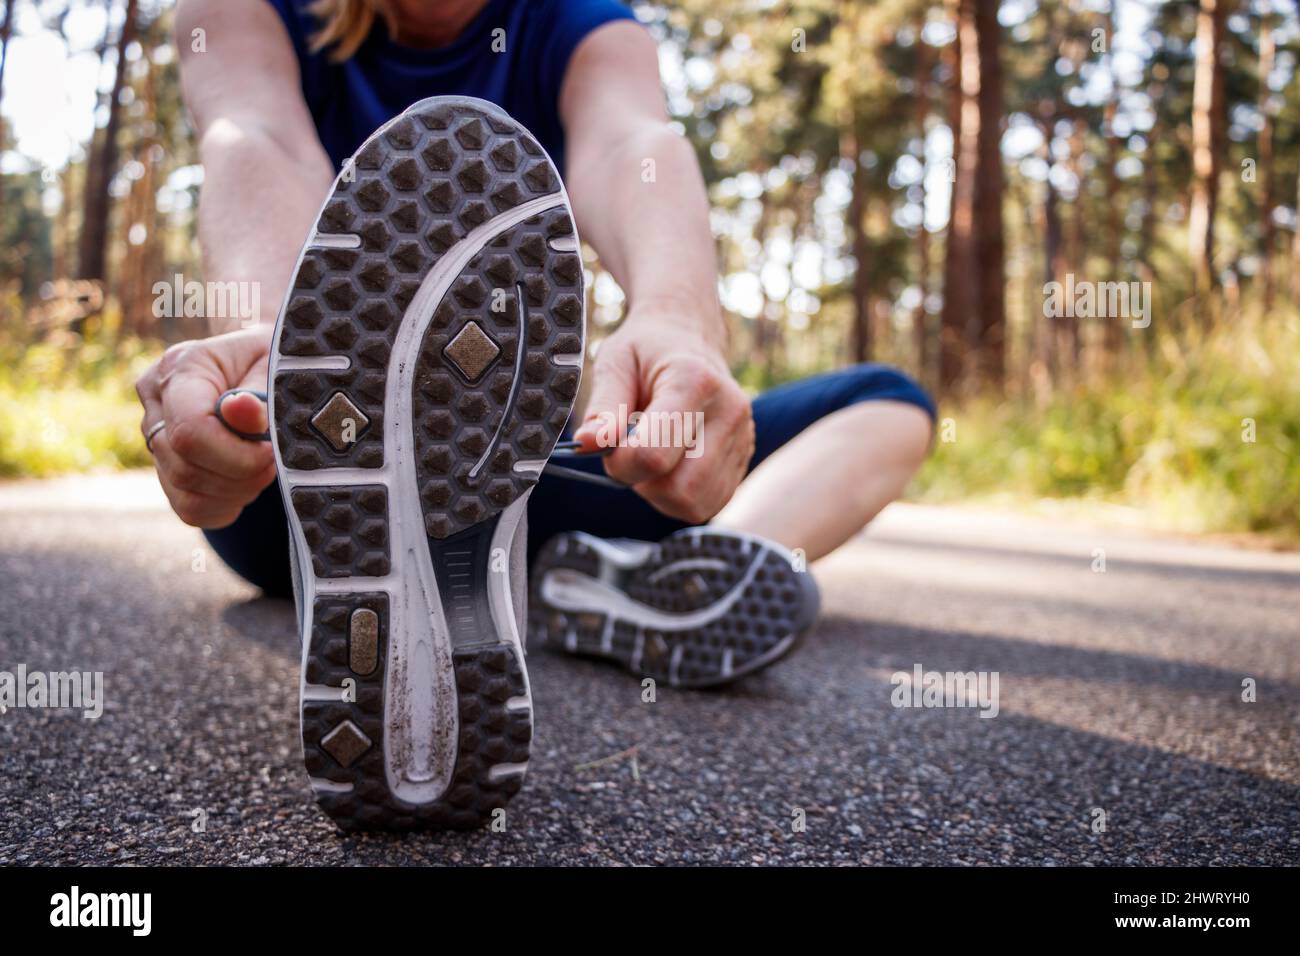 Woman tying shoelace of running shoe before jogging. Fitness and active lifestyle Stock Photo